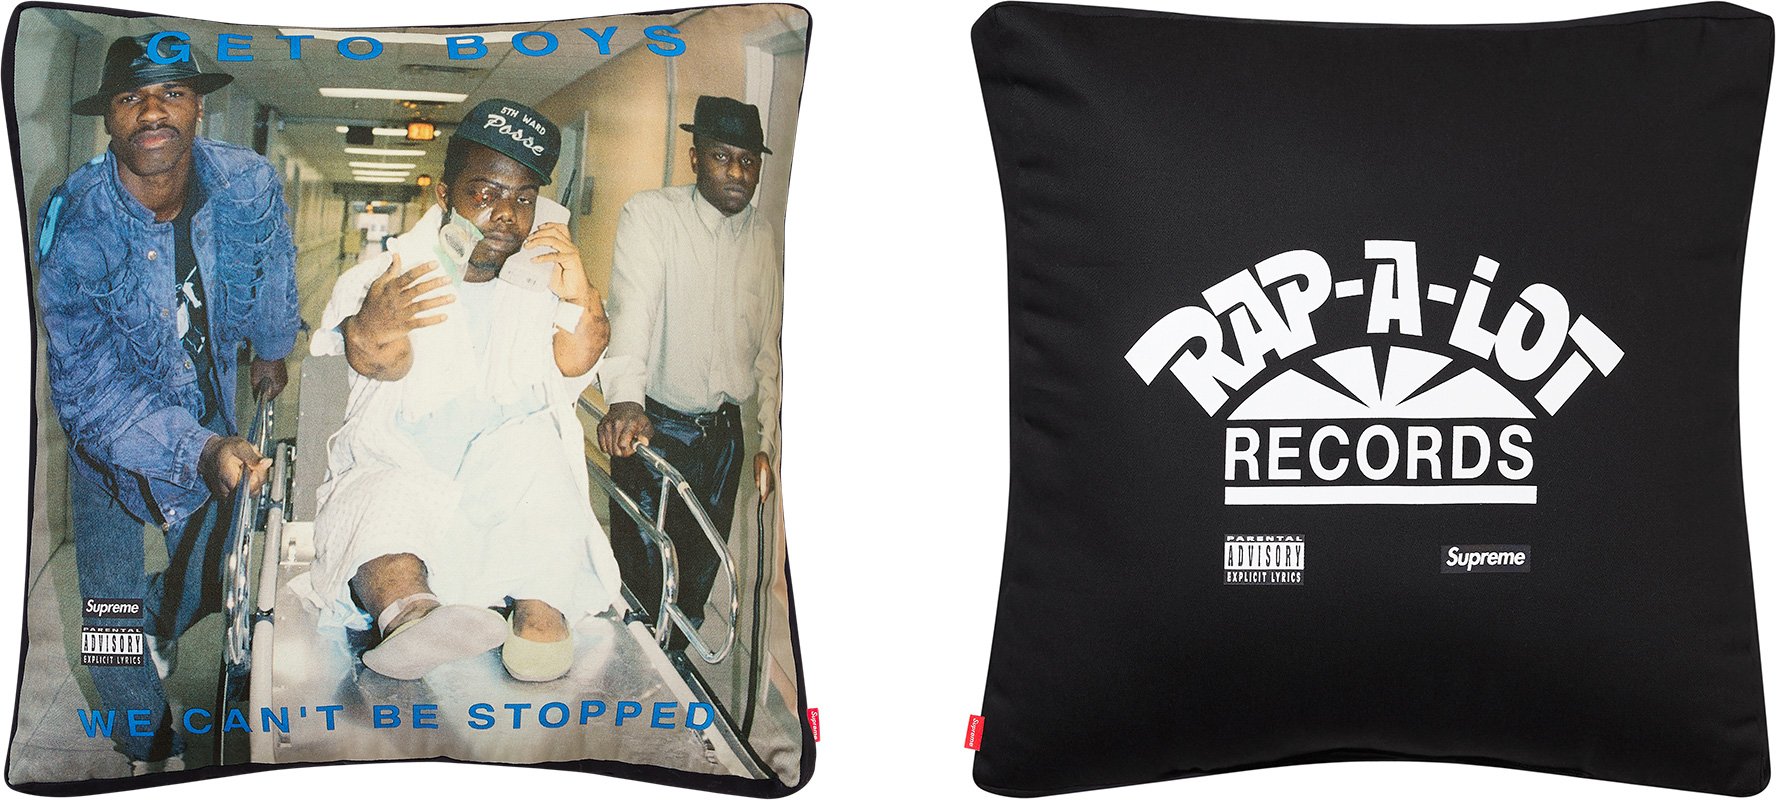 6 Supreme Collaborations That Altered the Meaning of “Luxury”